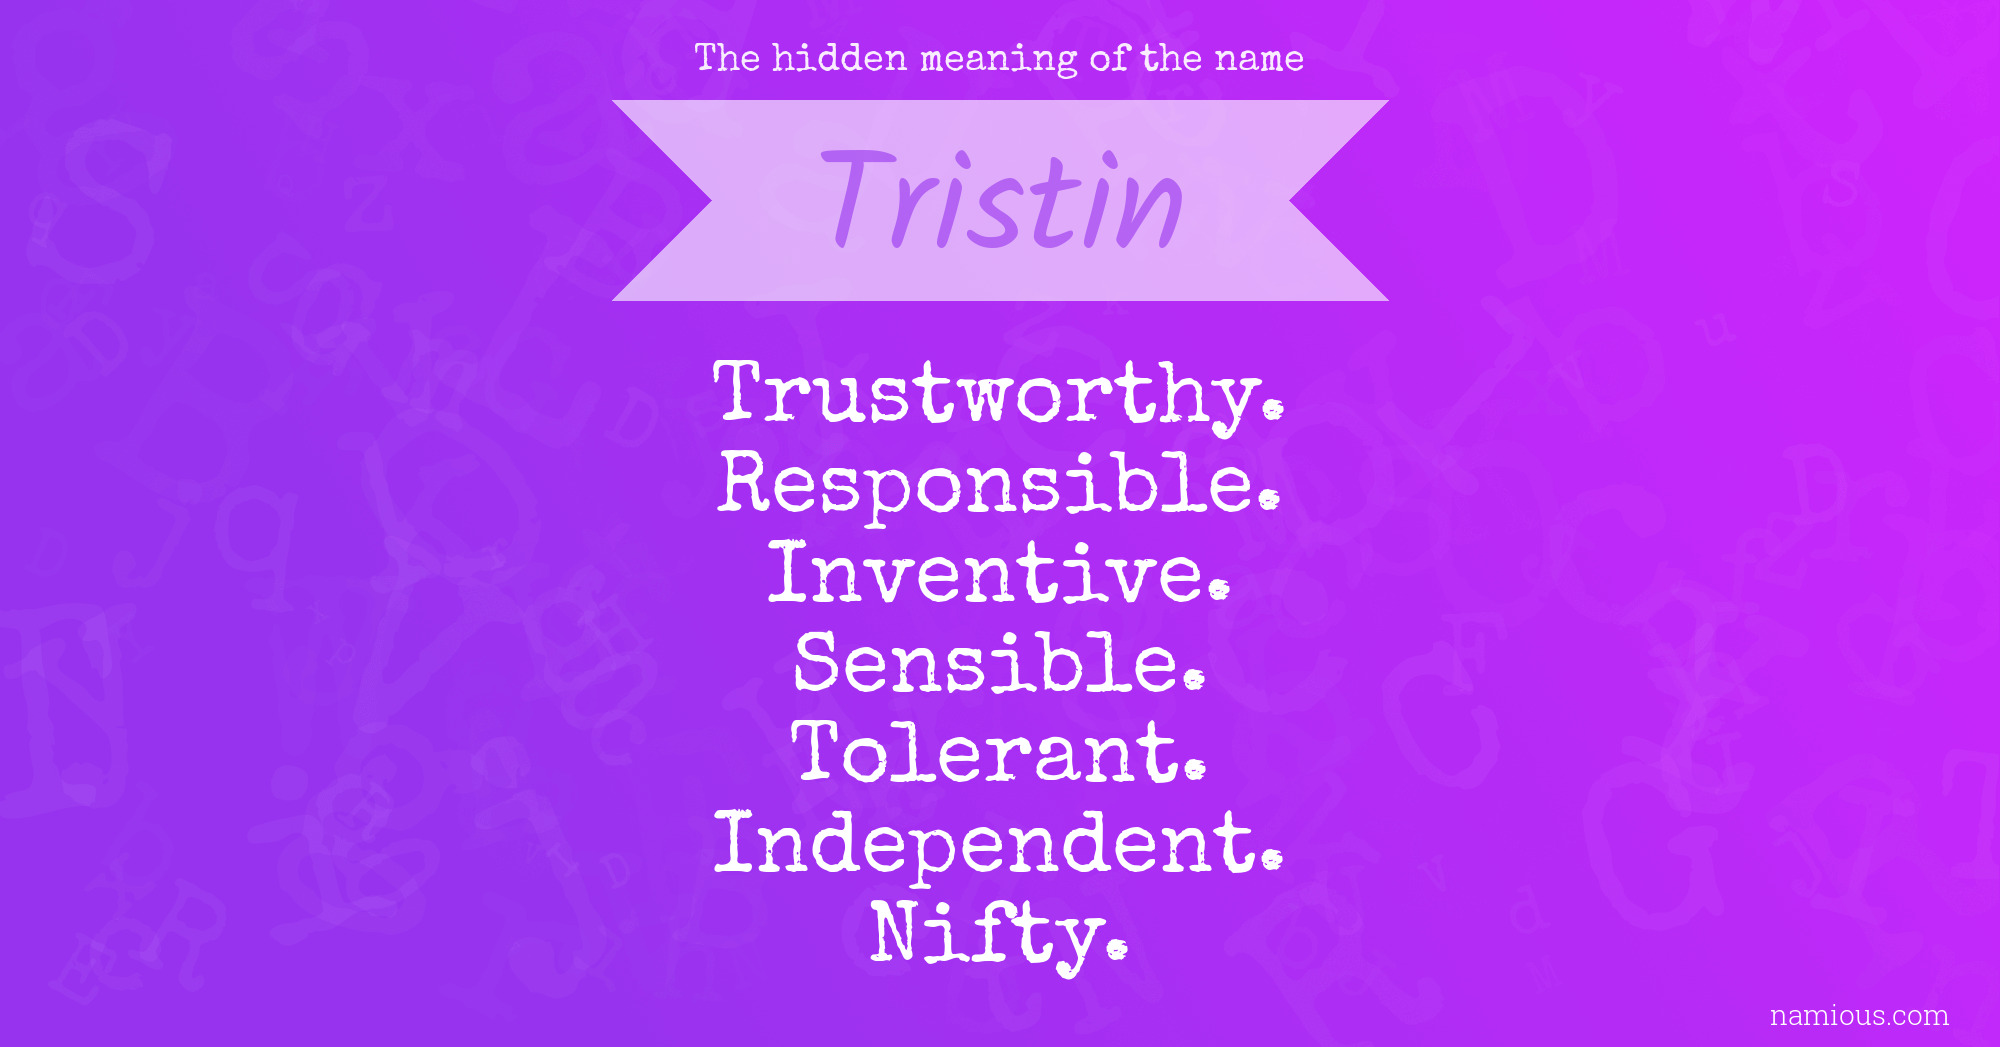 claudia dlt add photo what does tristin mean